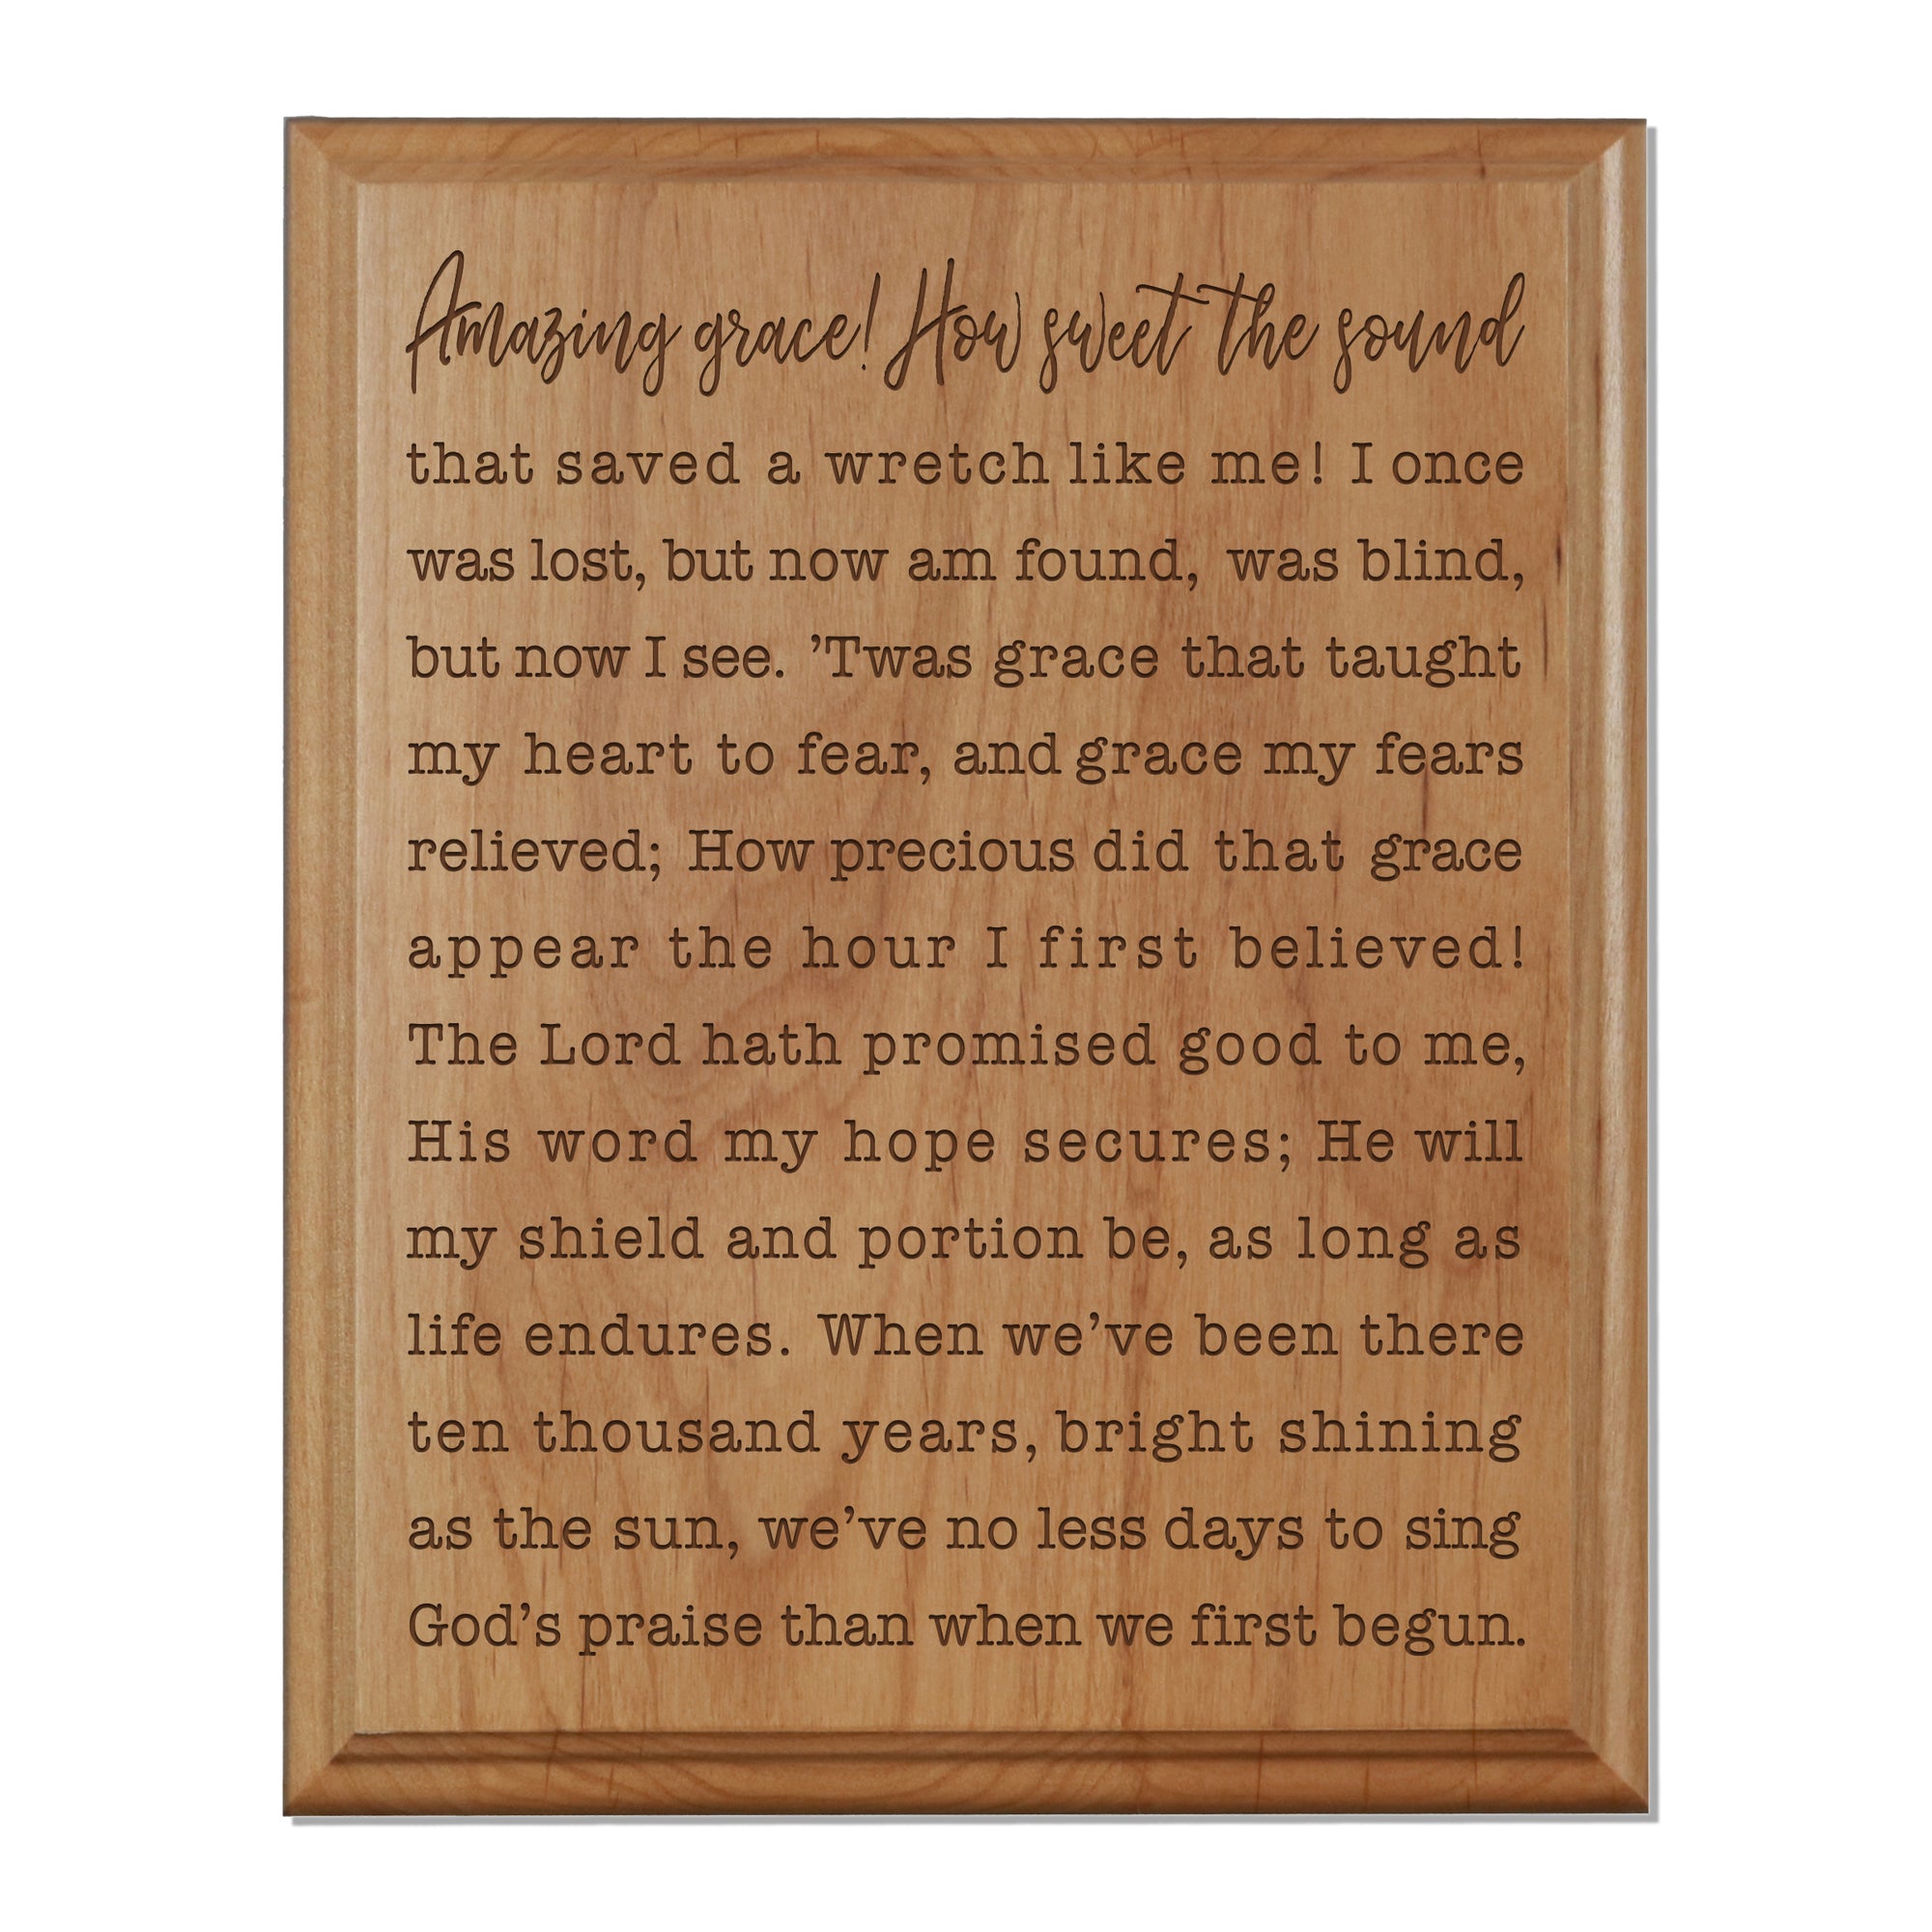 Home decor decorations quotes piano note lyrical picture rustic housewarming sentiment inspirational life house musical musically rhythmic rhythm Christian religious vintage Christmas gospel keyboard lesson manuscript musician hymnal